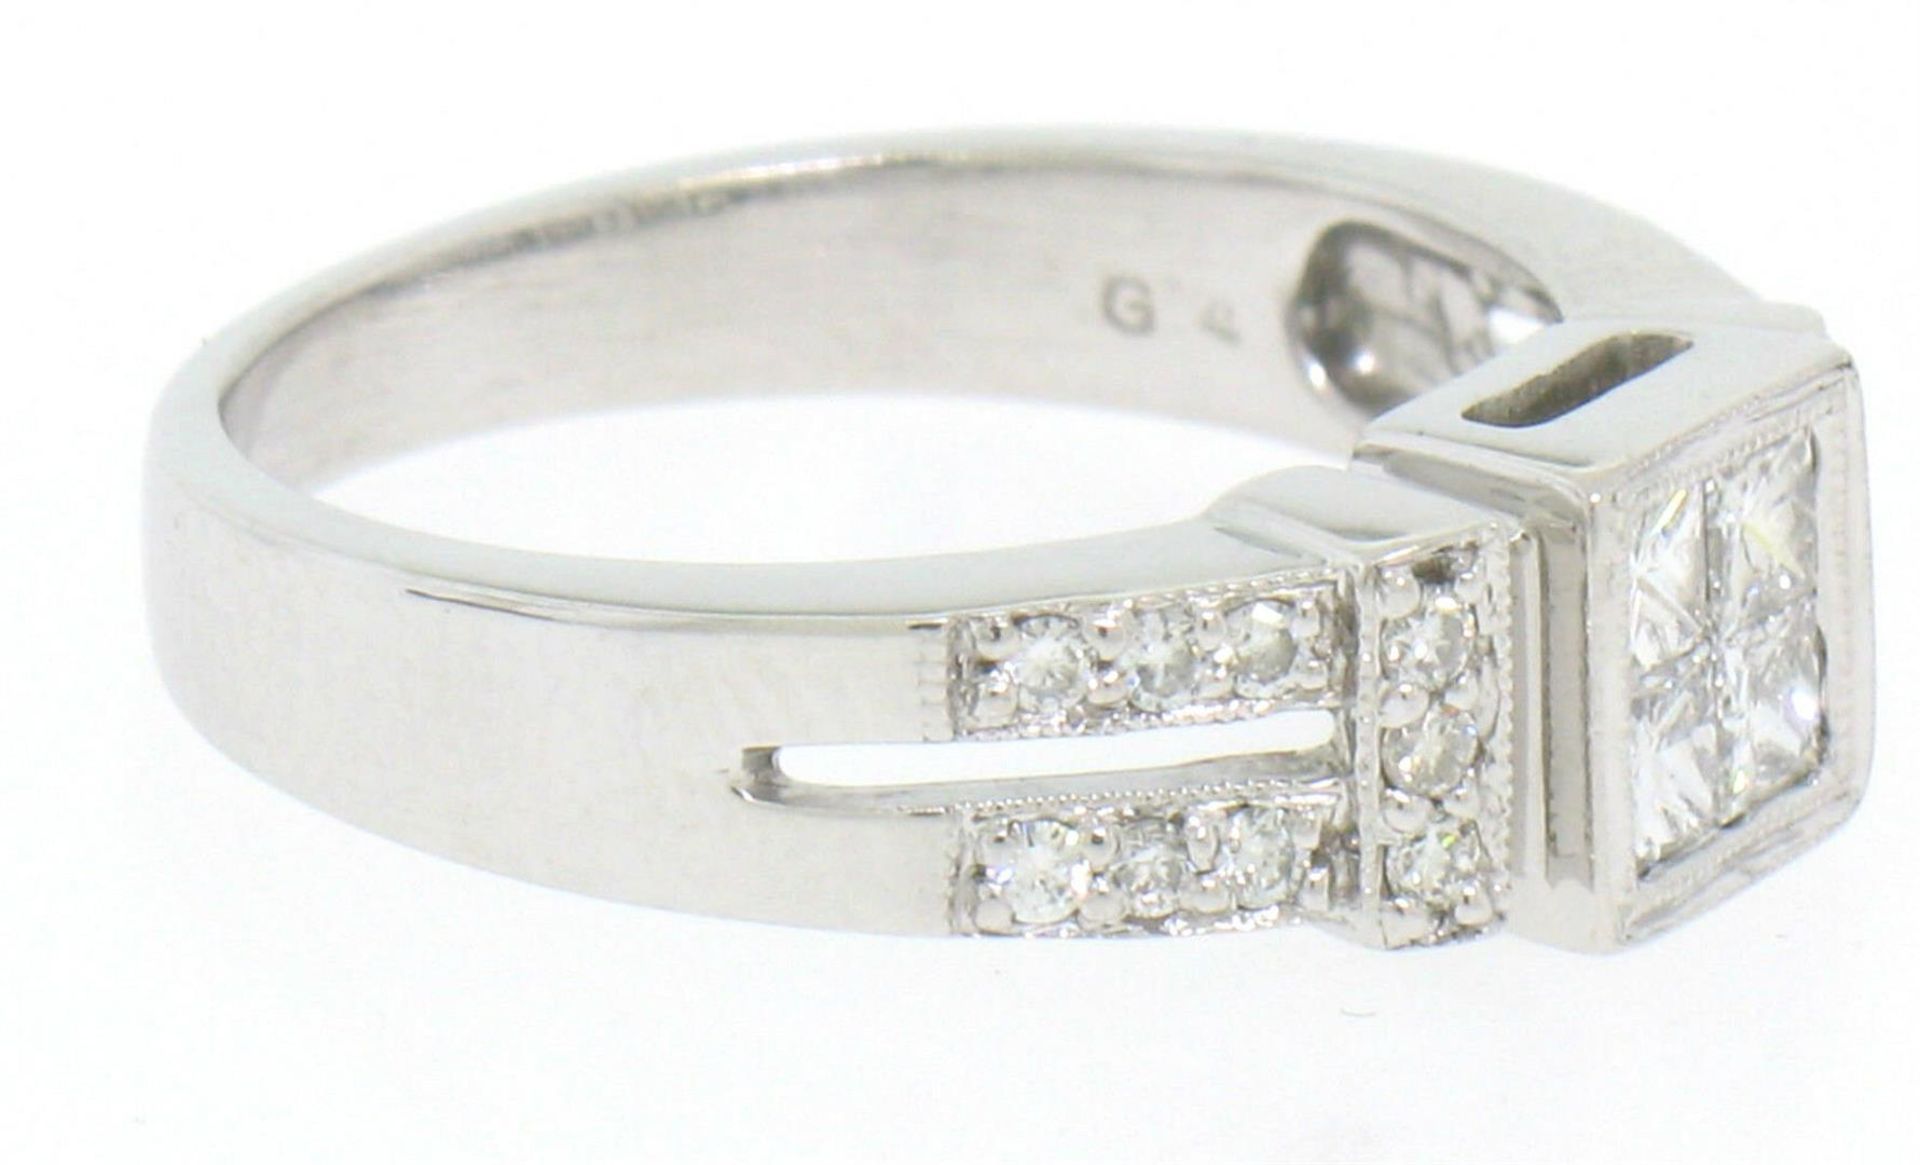 Modern 18k White Gold Princess & Pave Diamond Band Ring in Invisible Setting - Image 3 of 6